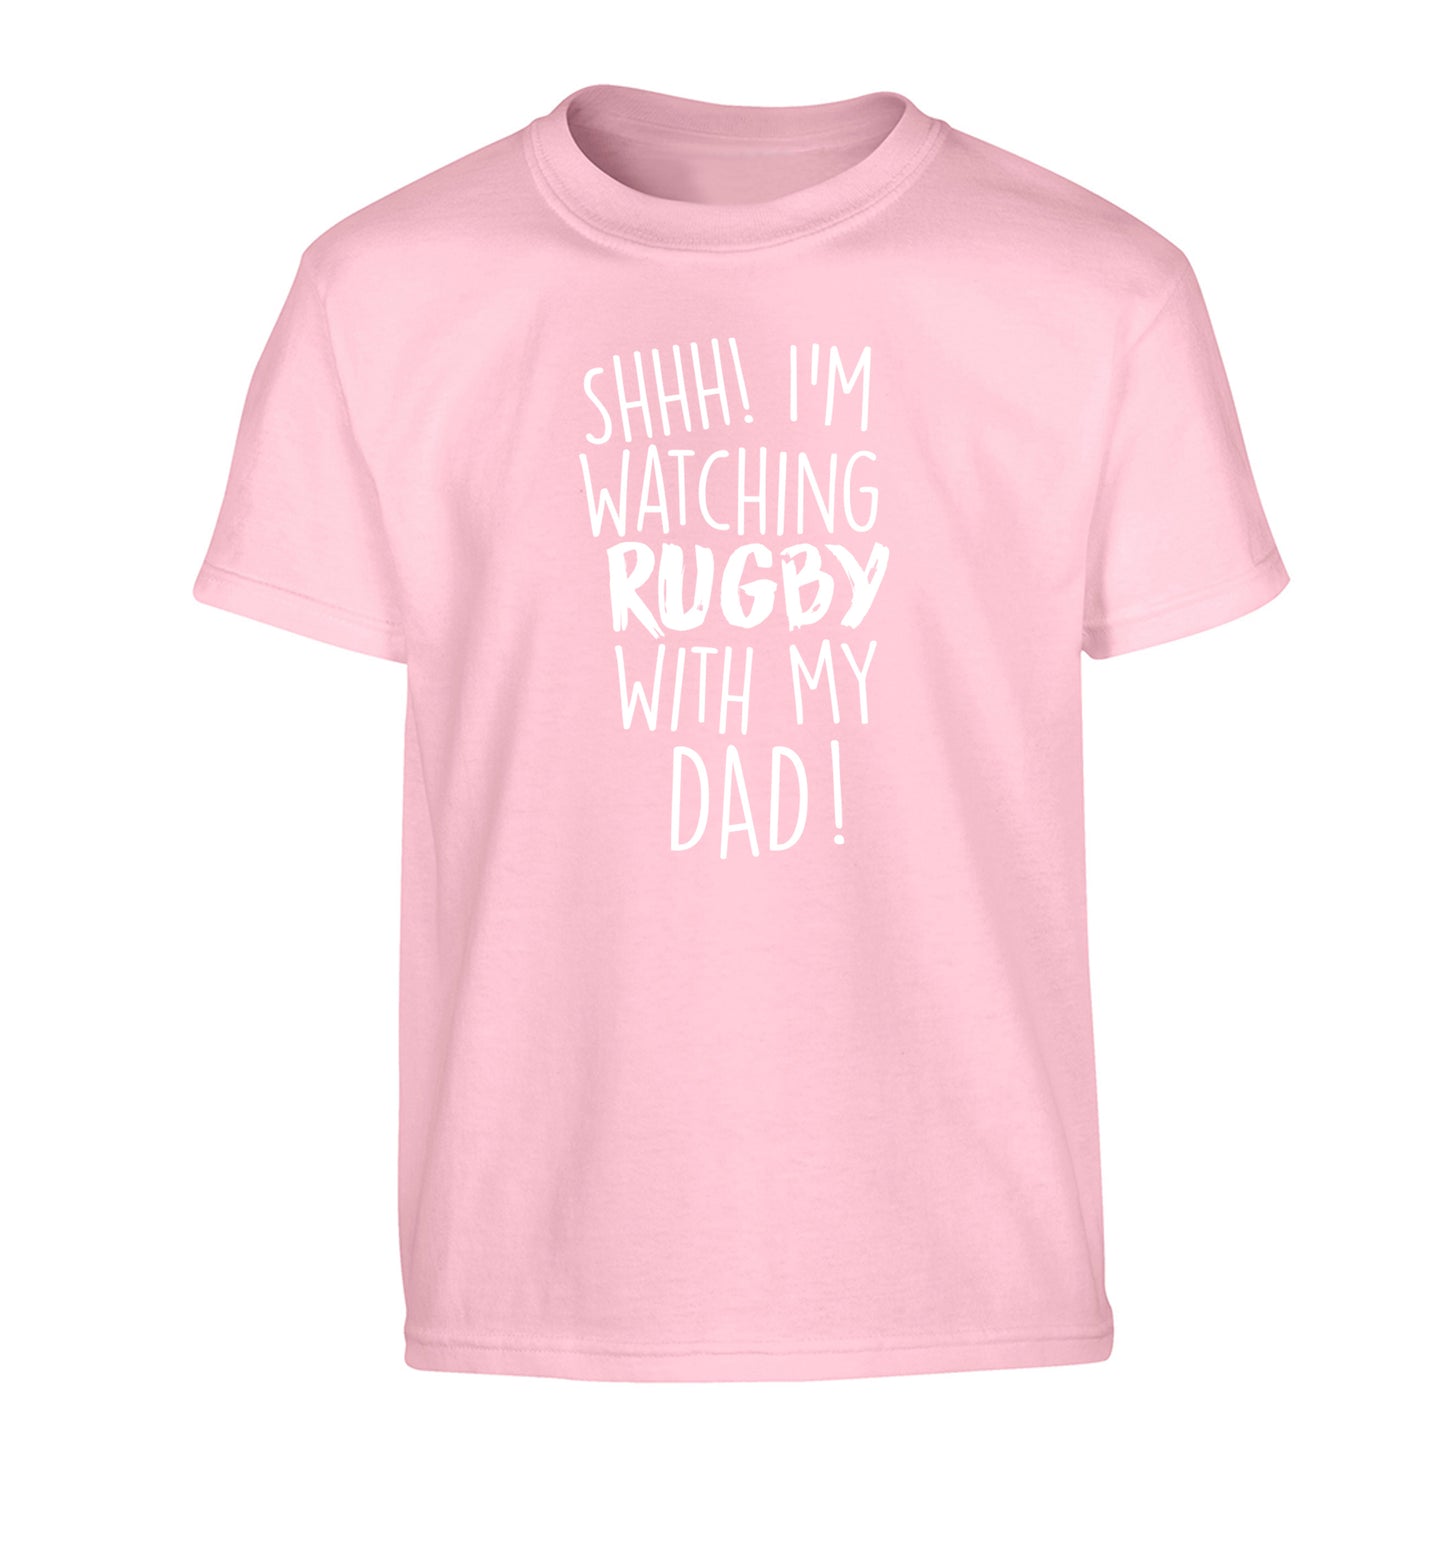 Shh... I'm watching rugby with my dad Children's light pink Tshirt 12-13 Years